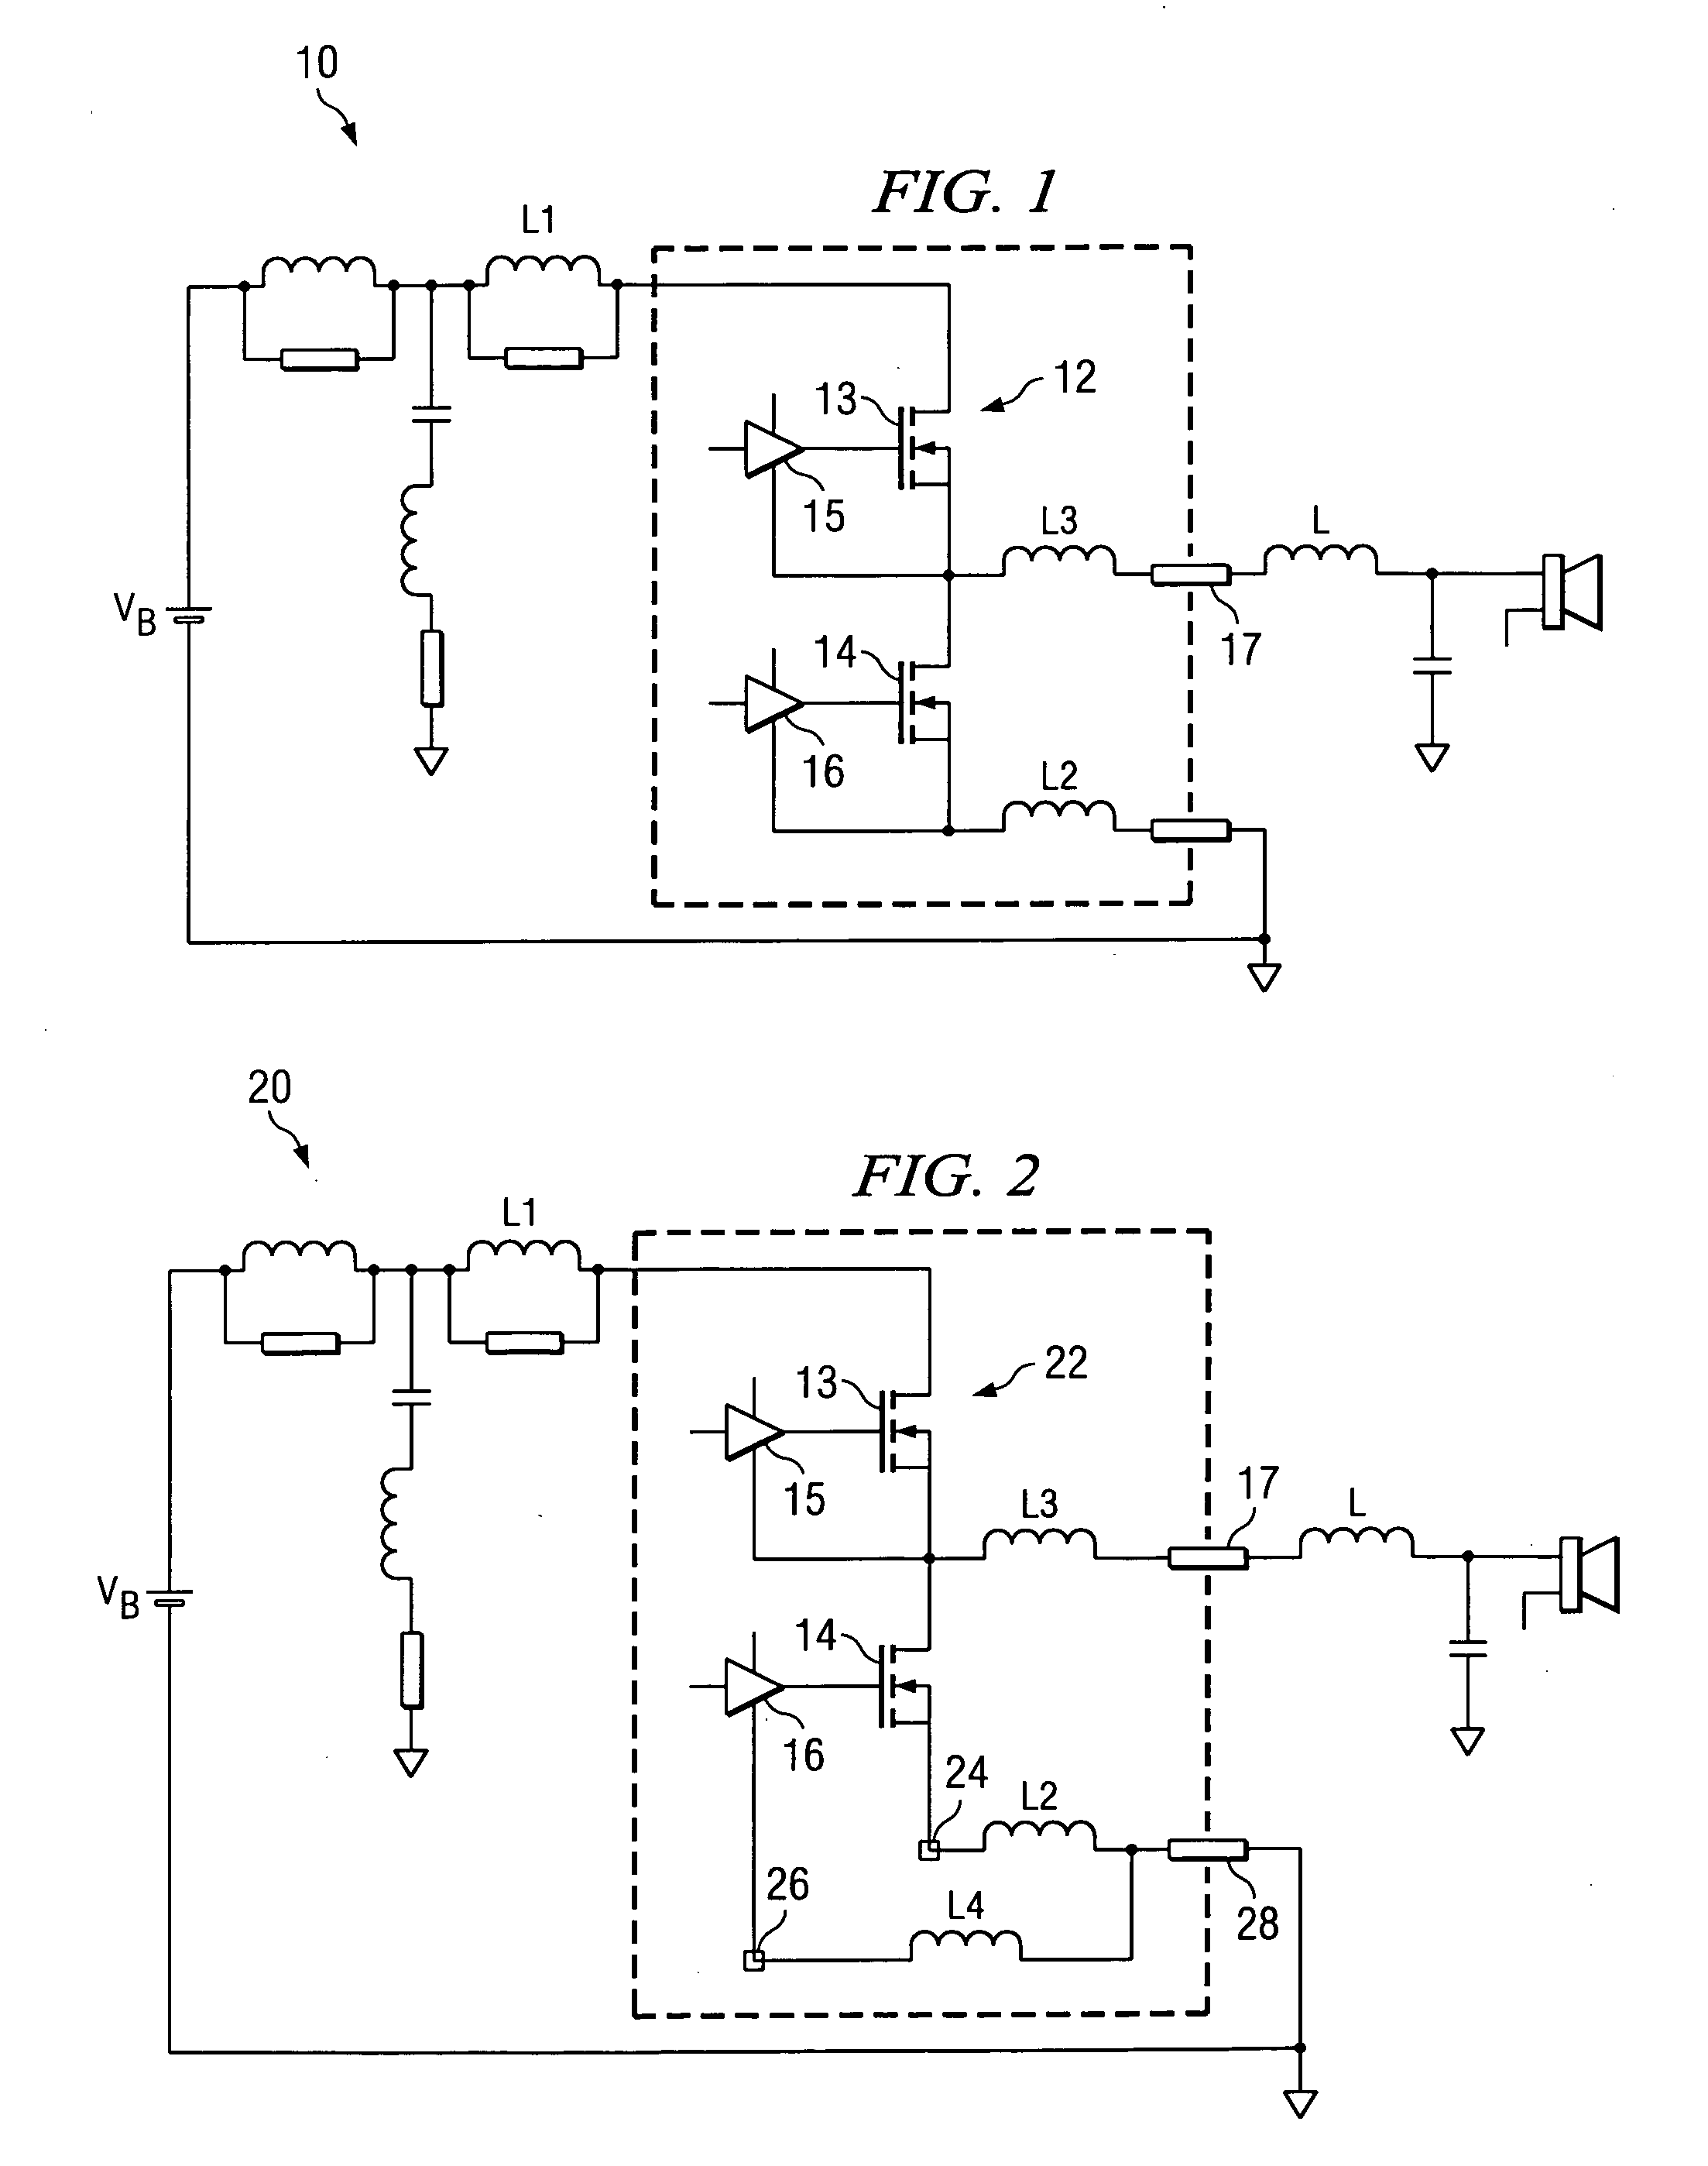 Reduction of voltage spikes in switching half-bridge stages